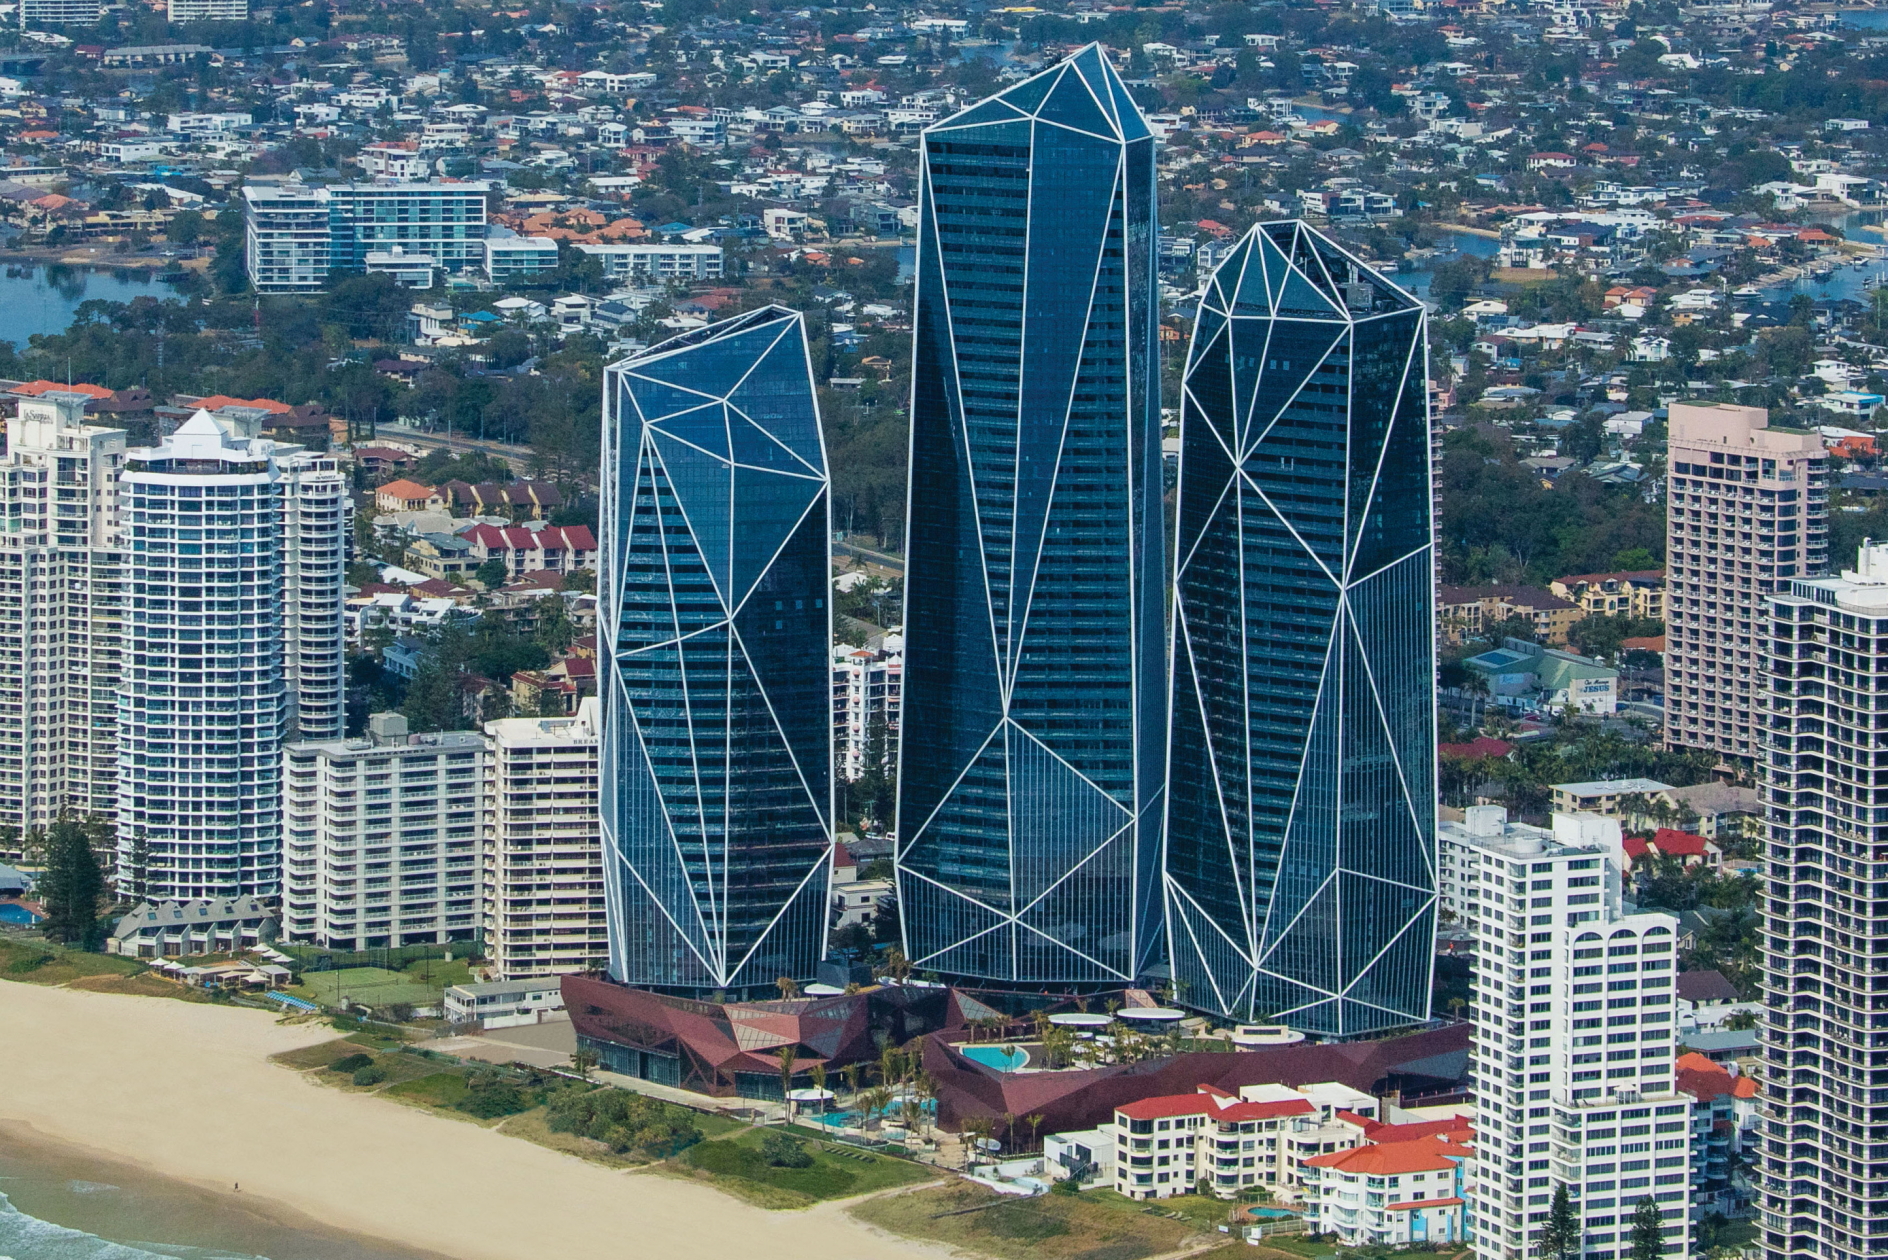 With a prime location on the beachfront in Surfers Paradise, the hotel and serviced apartments are in the central and tallest of the three landmark towers of the Jewel development. Click to enlarge.